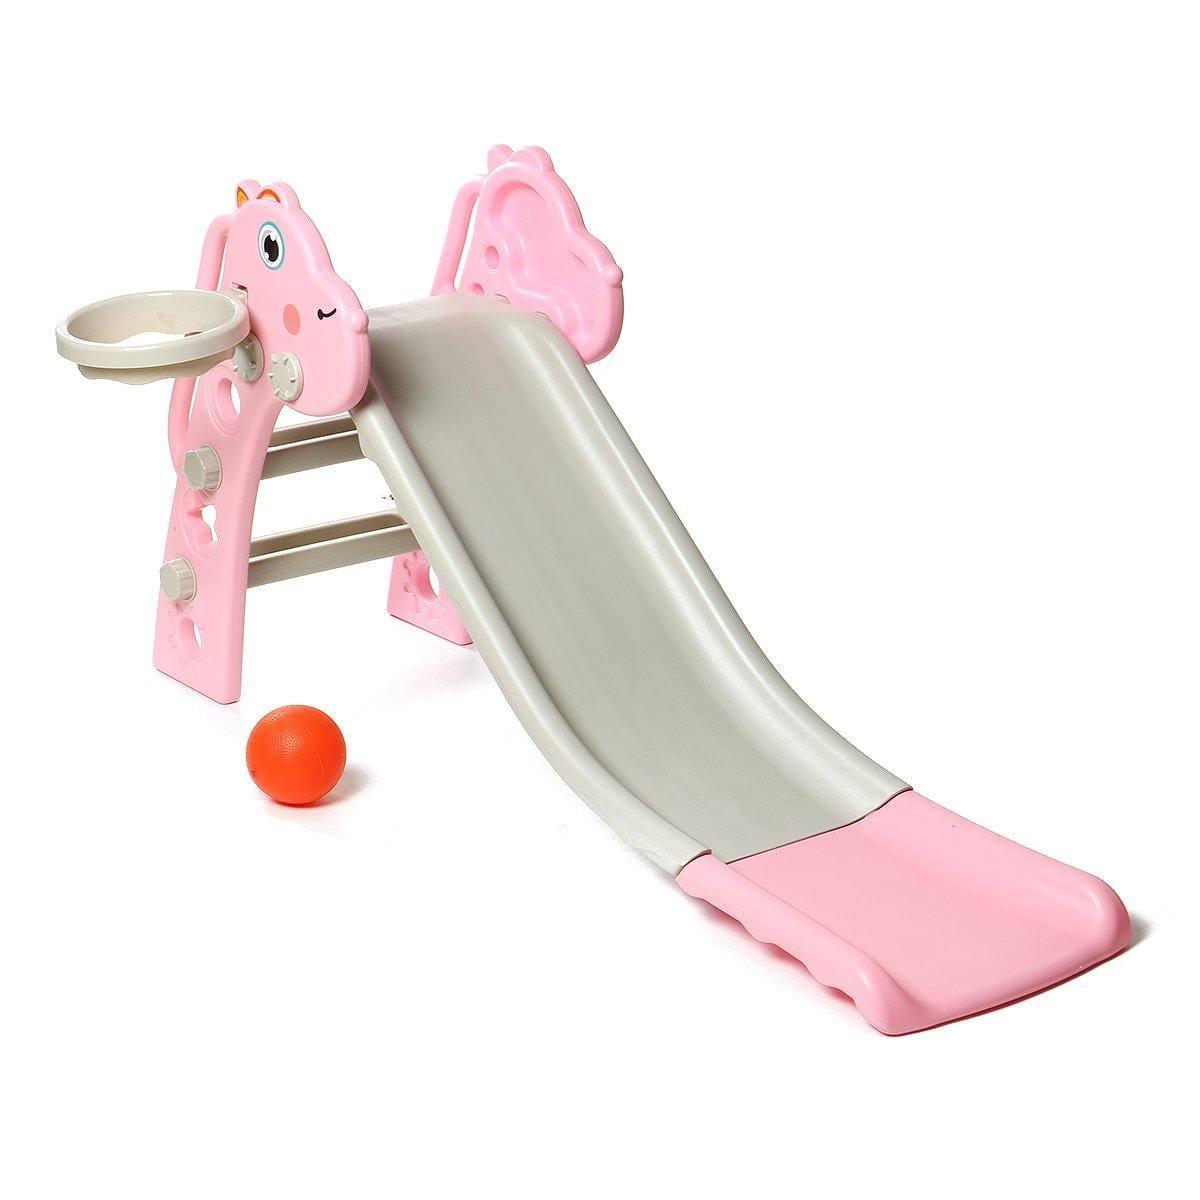 ezy2find toy slide Pink Baby Children Kid Long Slide Play Climber Household Indoor/Outdoor Playground Kids Toys